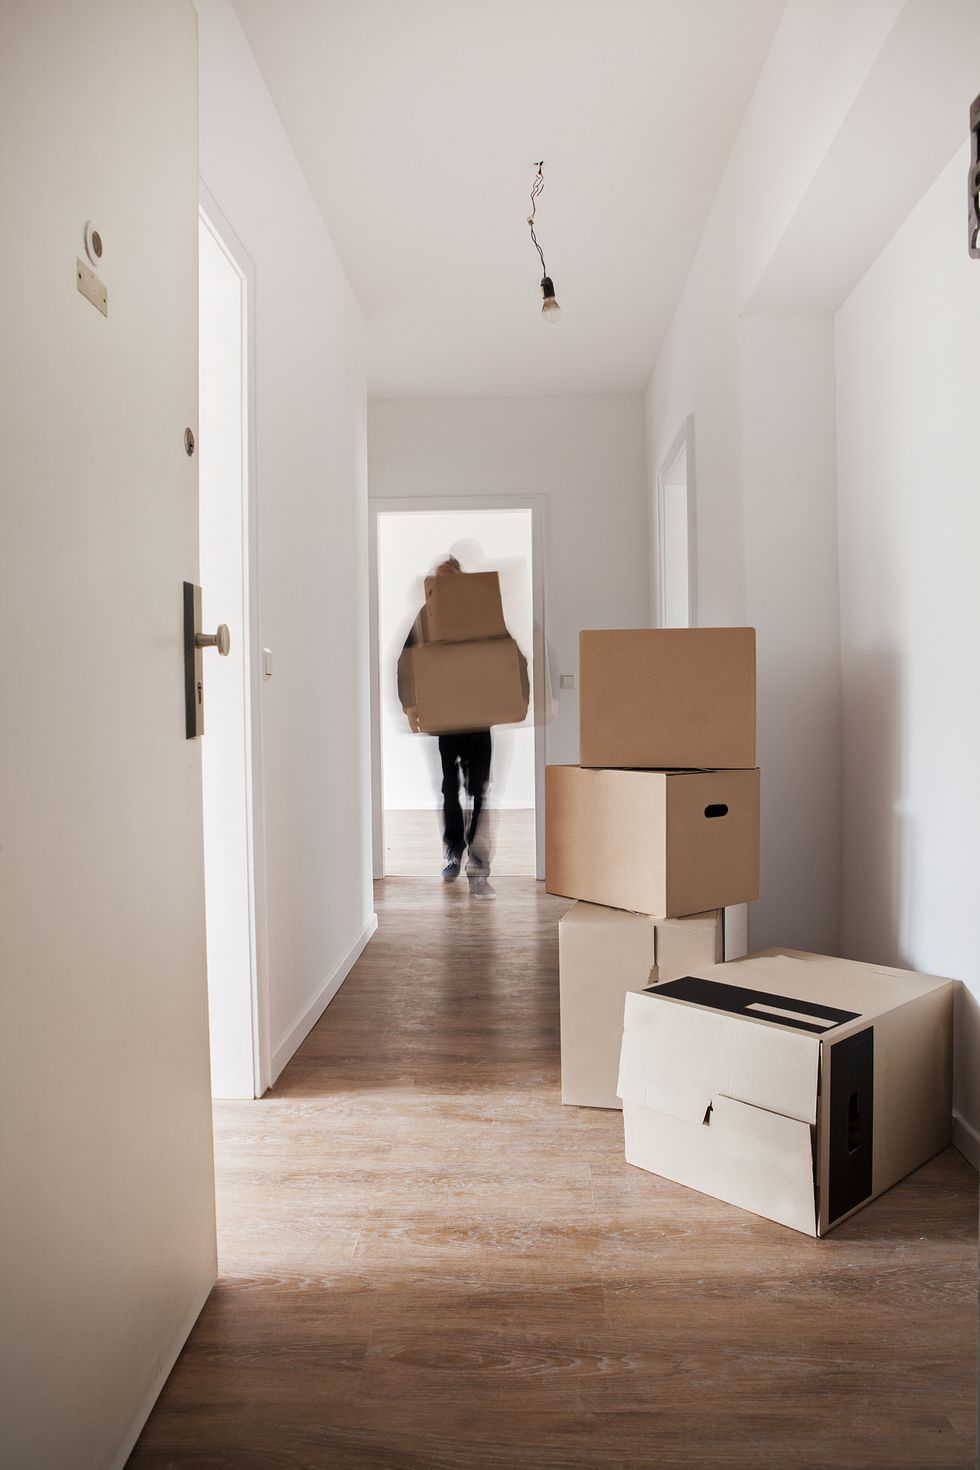 Man unloading cardboard boxes in the hallway of a new house